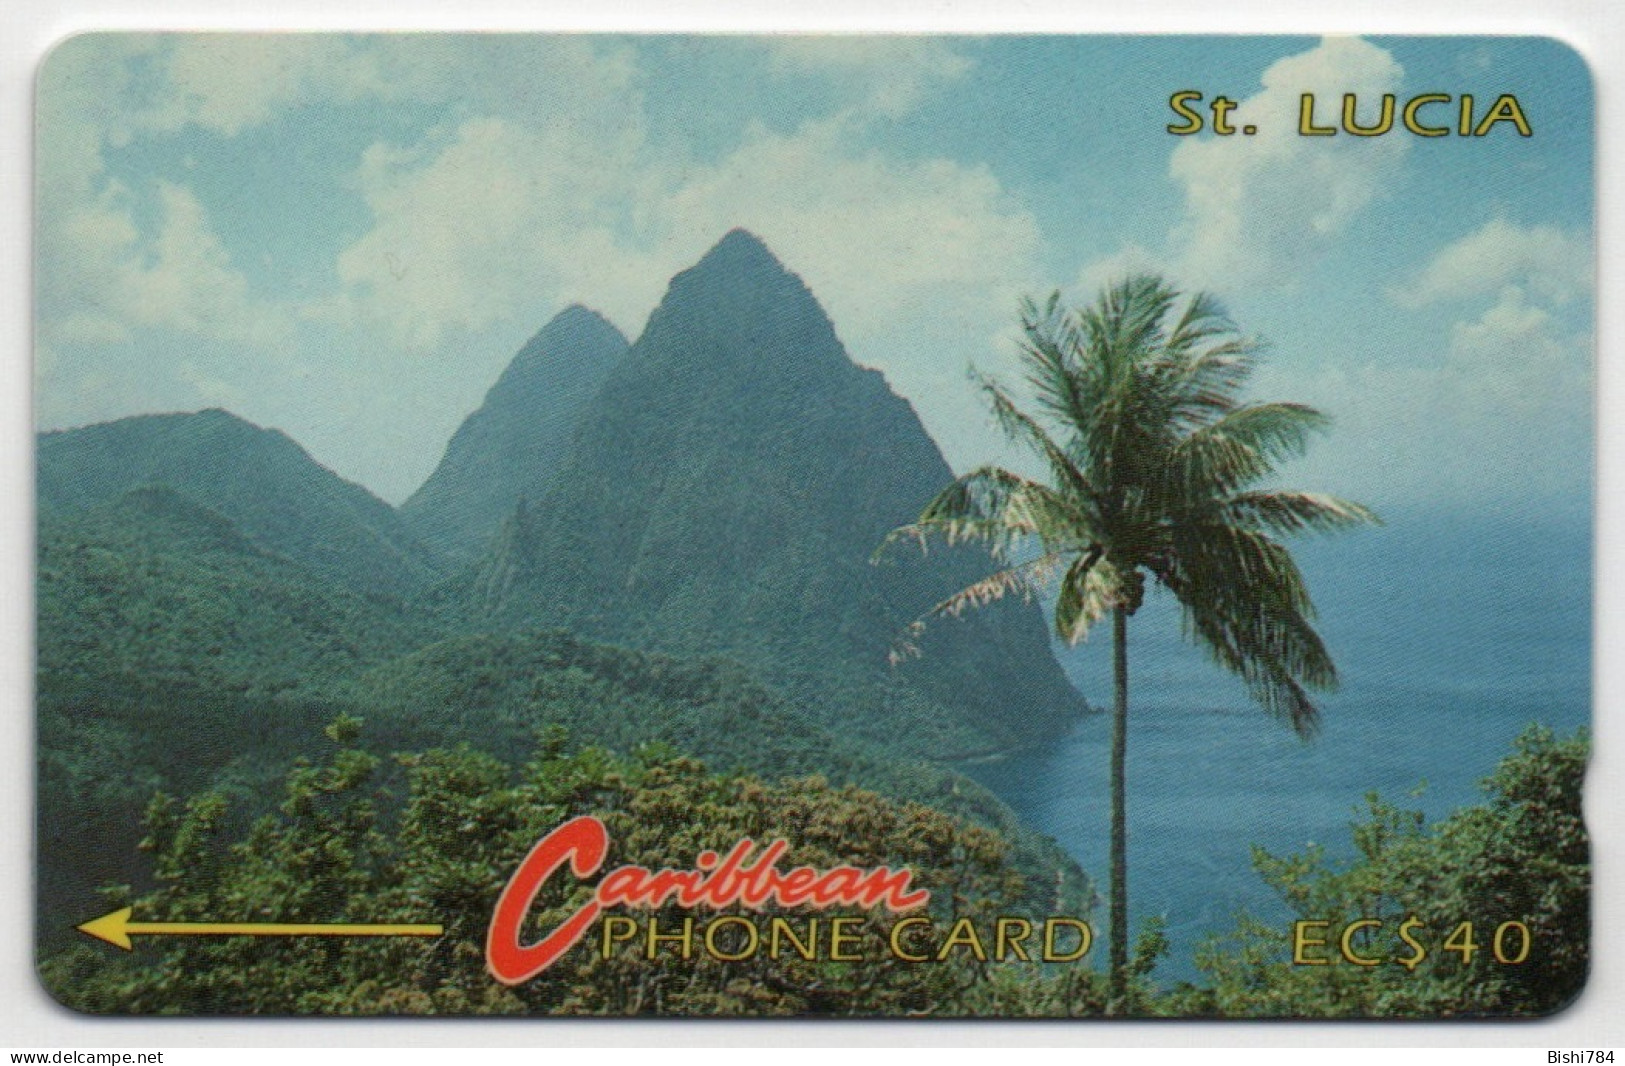 St. Lucia - Pitons - 3CSLC (Short, Italic Font With Curved 3) - Sainte Lucie